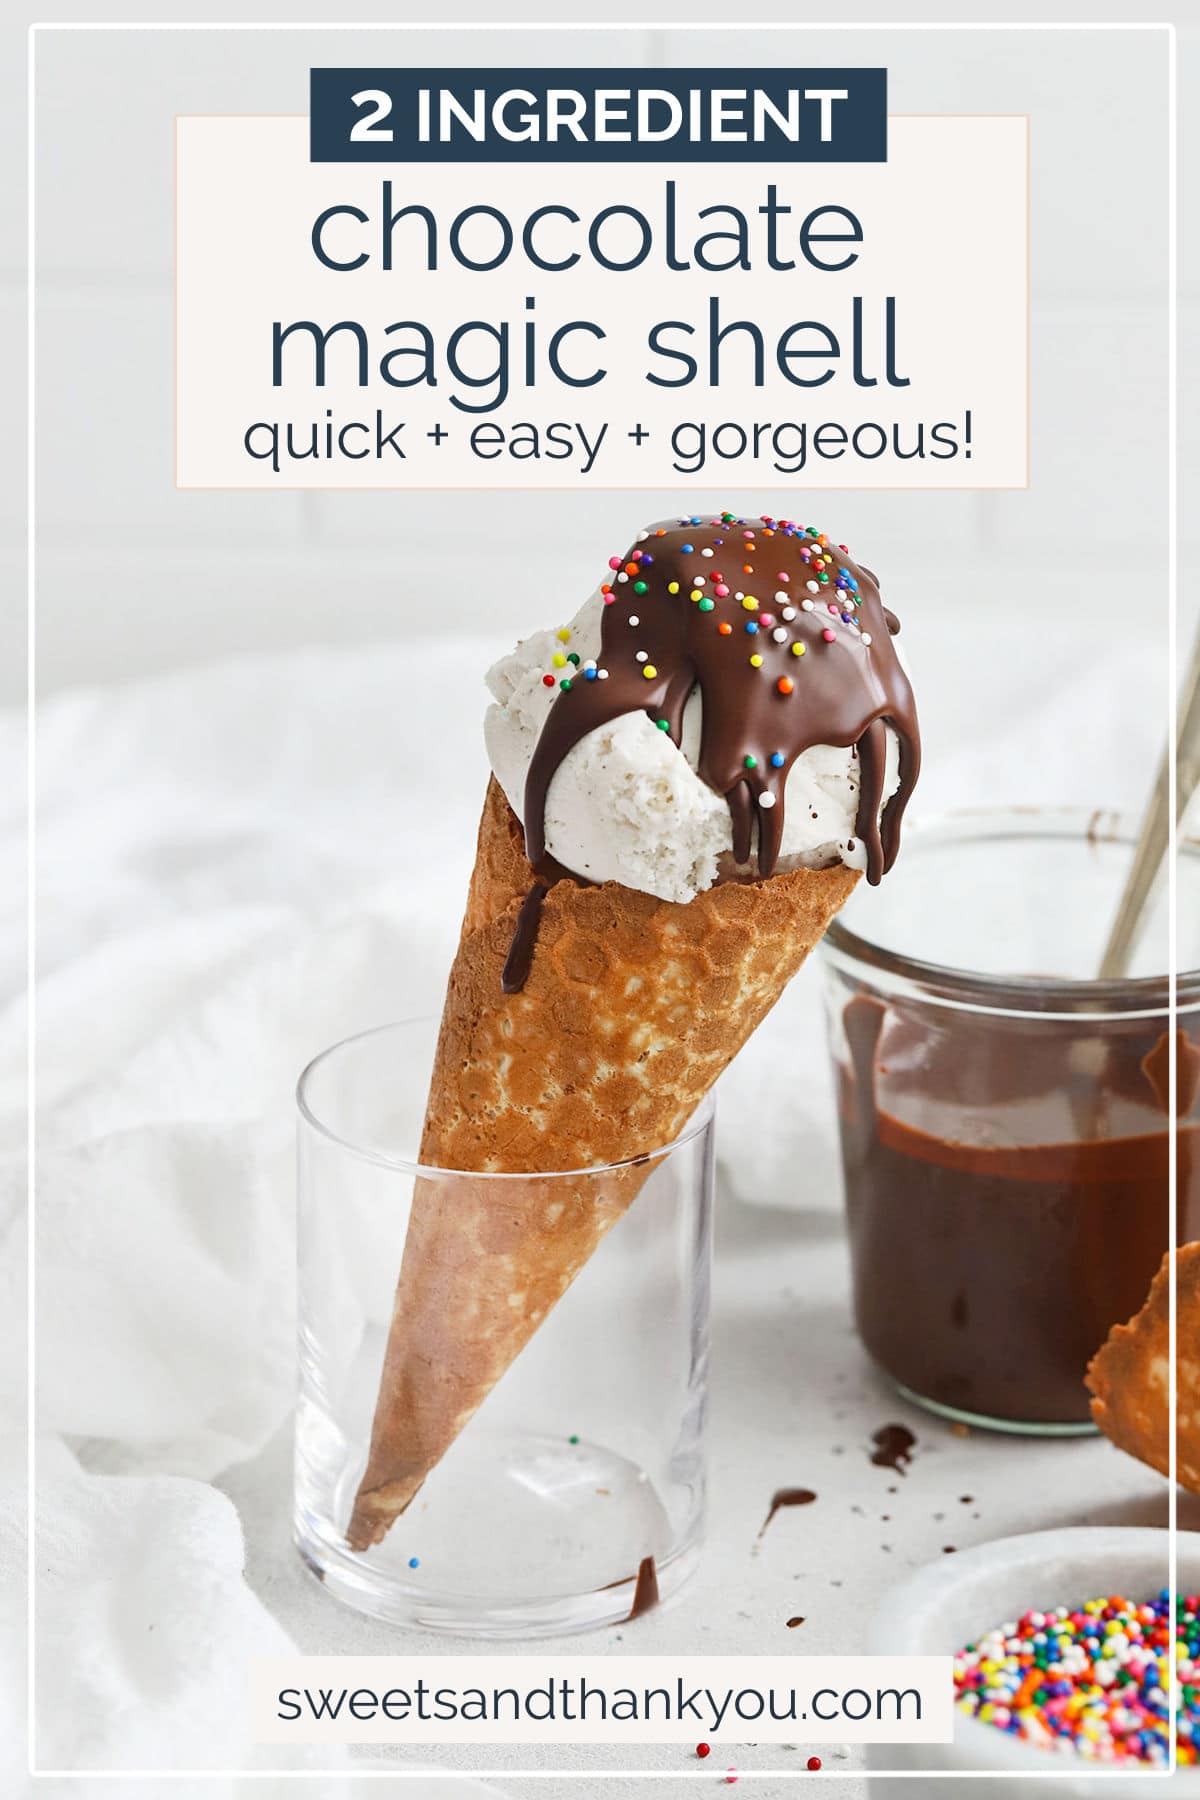 Easy 2-Ingredient Chocolate Shell For Ice Cream - This homemade magic shell topping recipe adds a perfect chocolatey crunch to your favorite scoop of ice cream! // Homemade chocolate magic shell // healthy magic shell // vegan magic shell // vegan chocolate shell // healthy chocolate shell // homemade magic shell for ice cream // Chocolate sauce for ice cream // ice cream chocolate sauce #chocolateshell #magicshell #chocolatesauce #vegan #glutenfree #icecream #icecreamtoppings #dairyfree